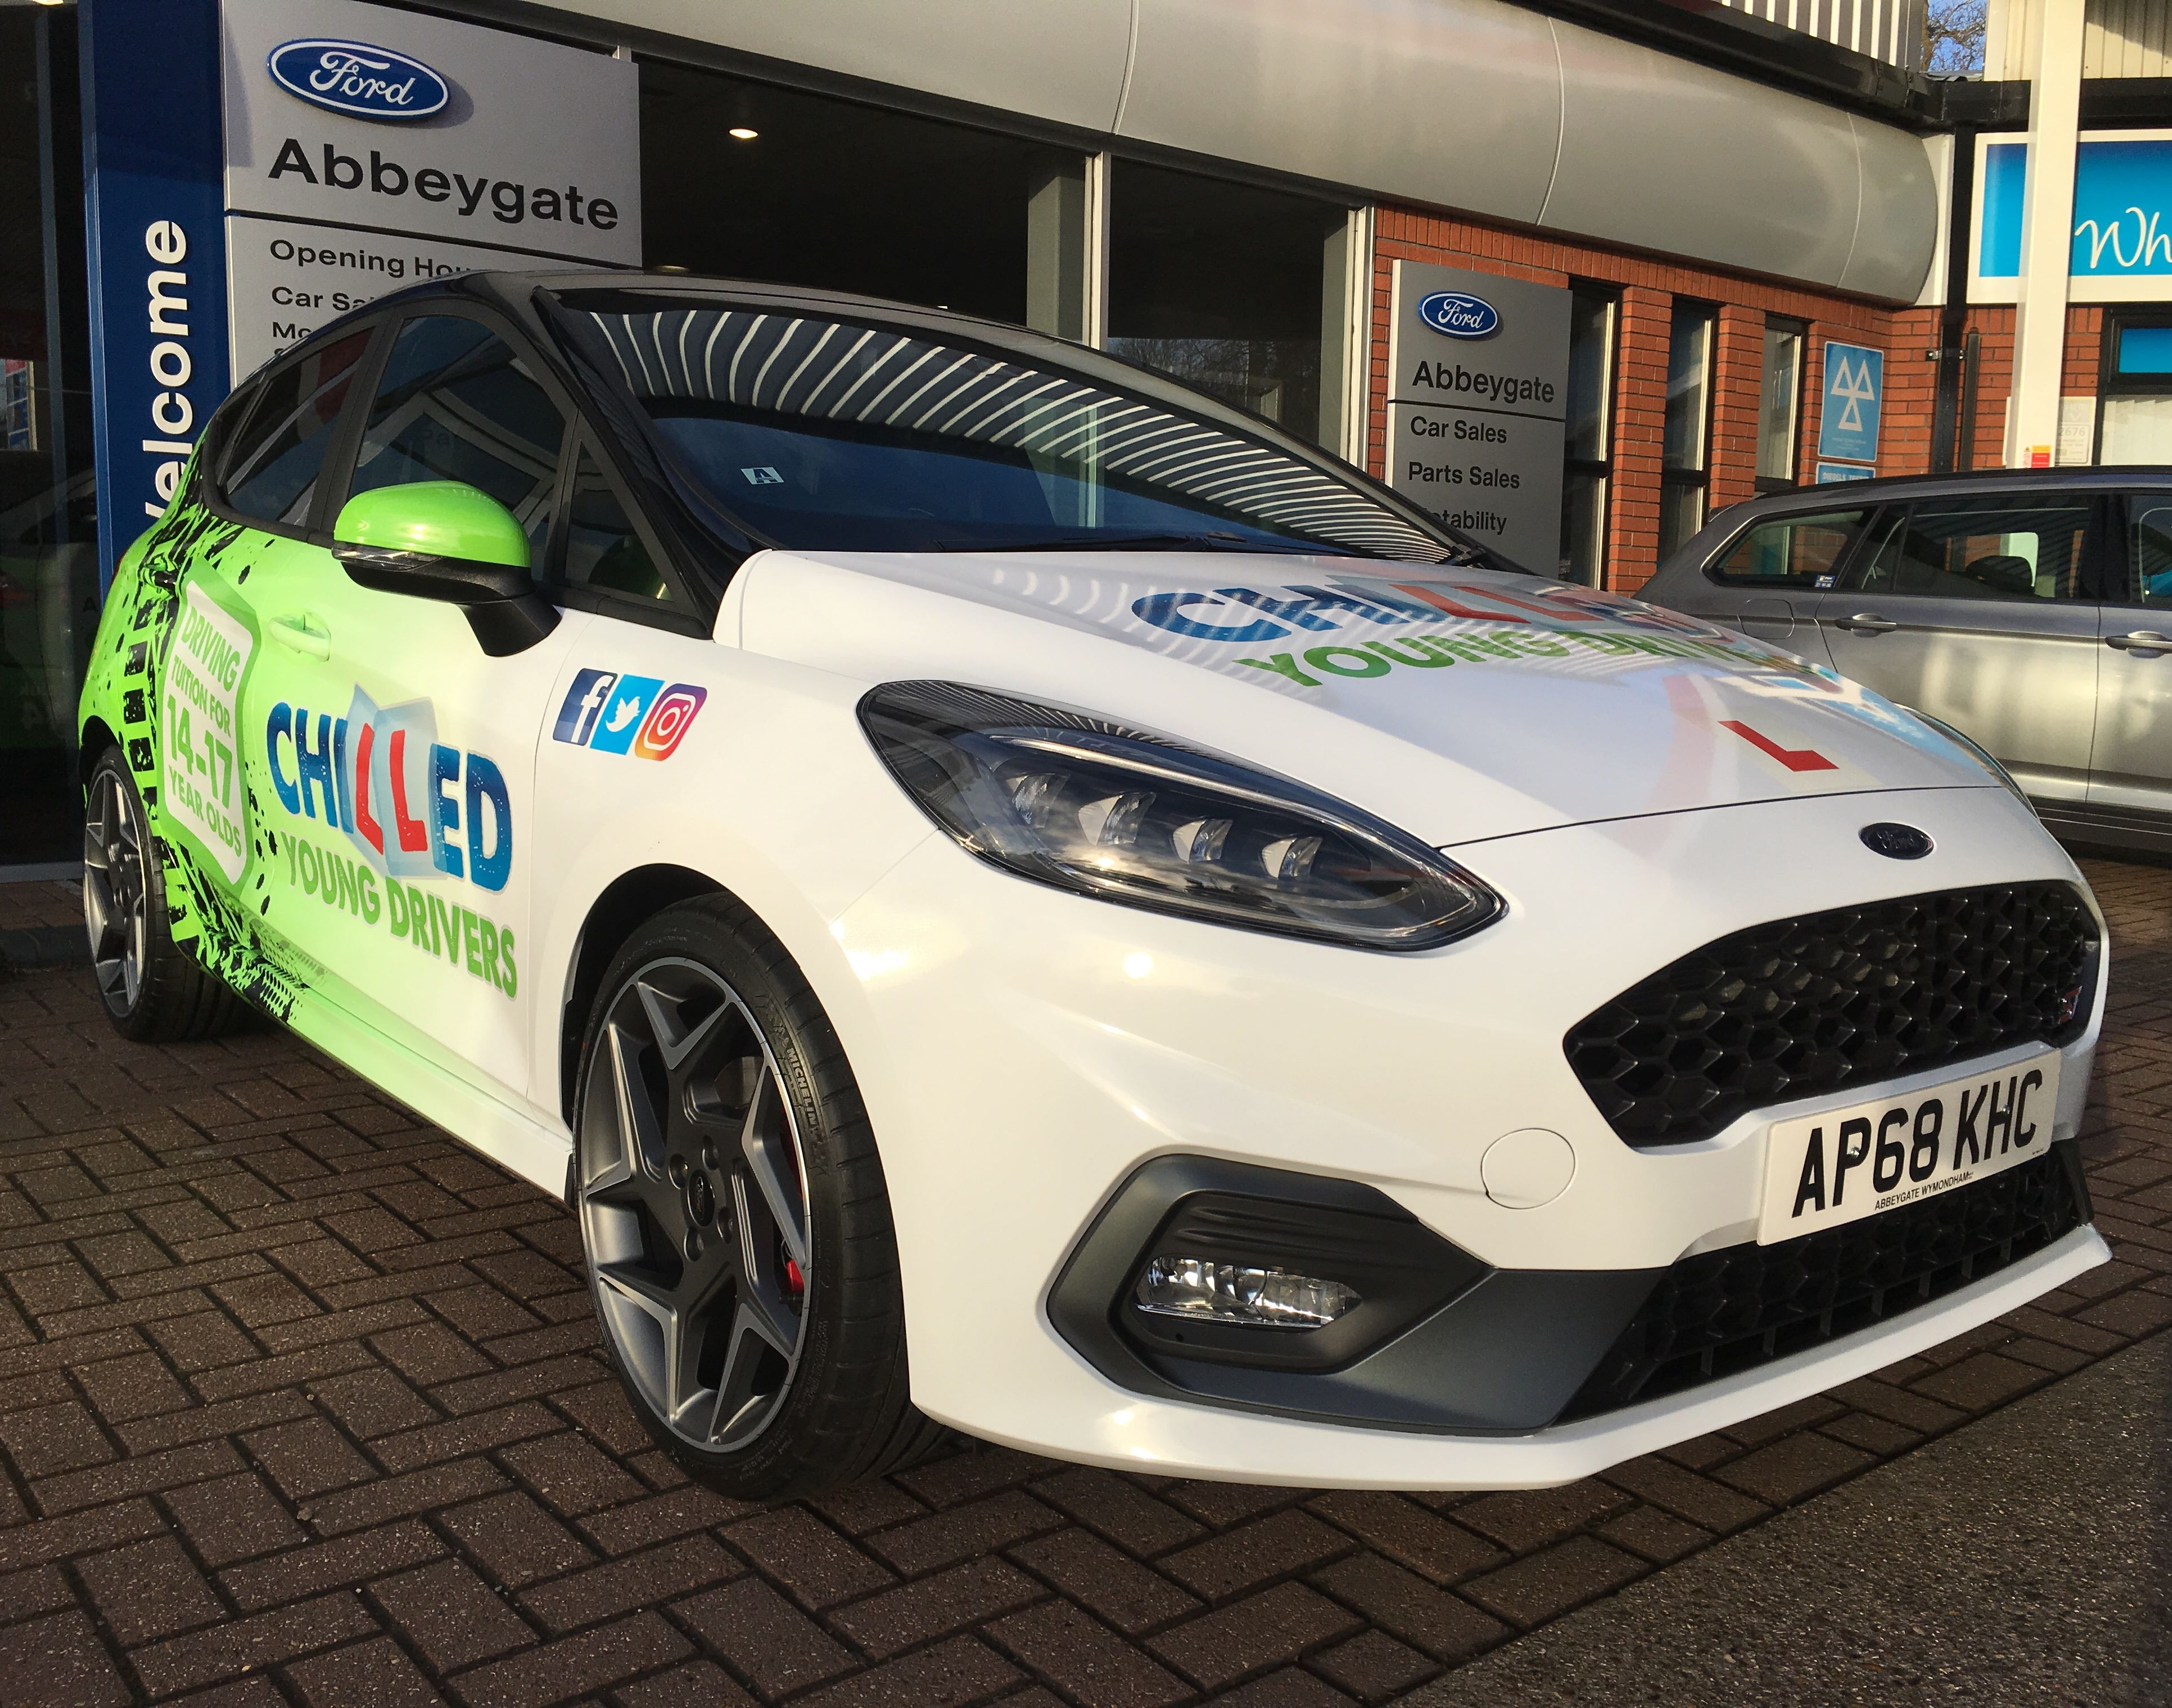 Chilled Driving Tuition Ltd take delivery of a New Ford Fiesta ST-3 for their fleet